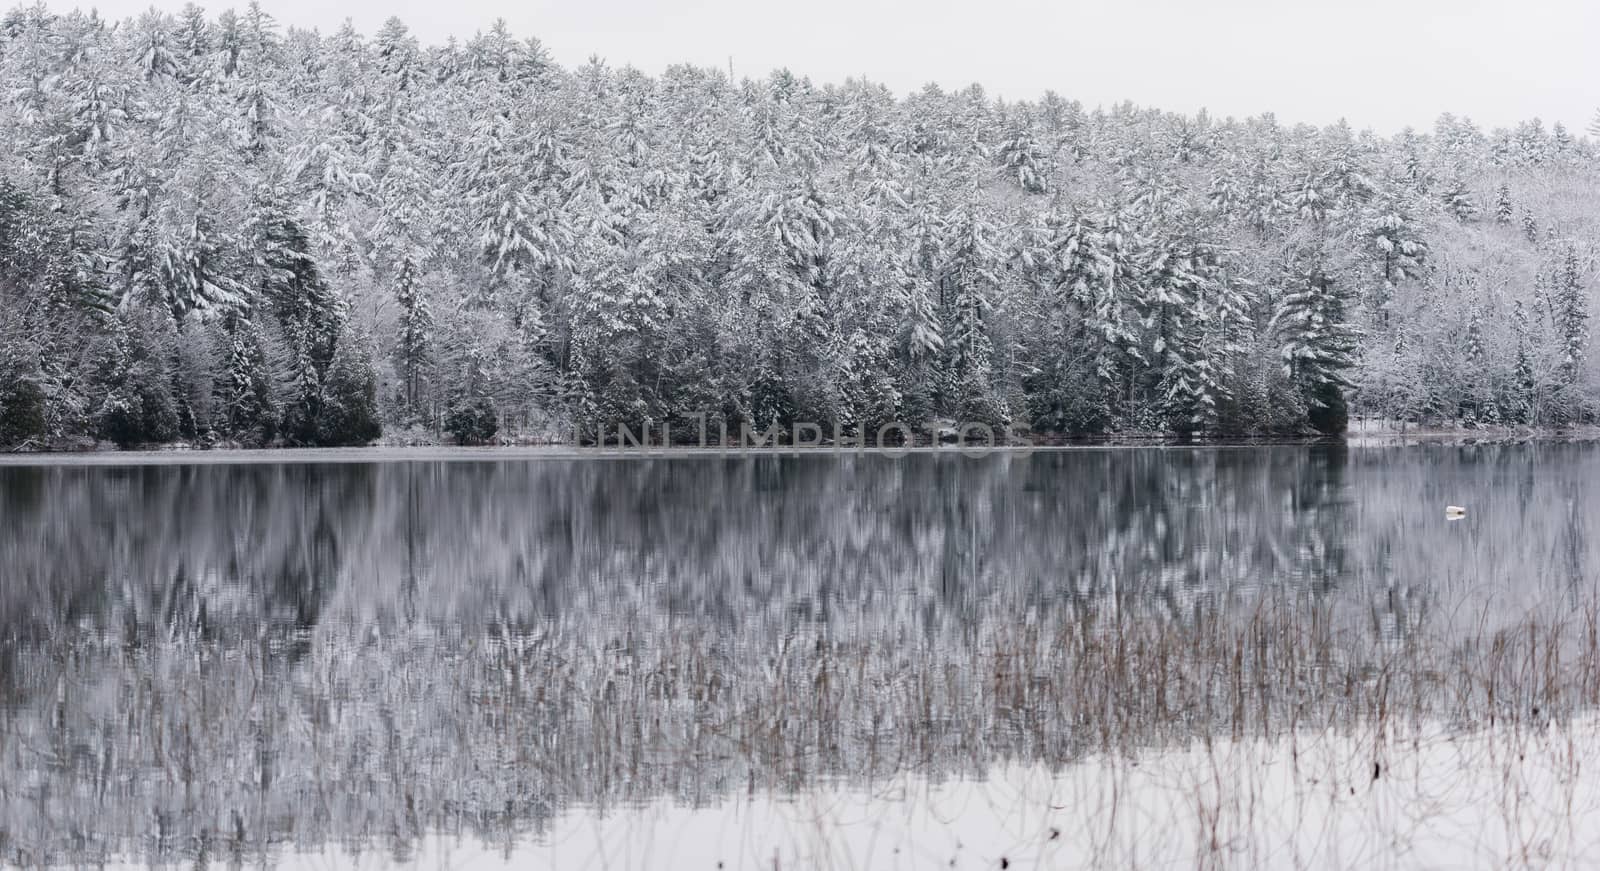 Winter forest reflections.  Mirage on a yet unfrozen lake. 
Still waters reflect winter forests.  Light snow under subdued overcast November sky.  Reflections of waterfront forest mirrored on the lake.